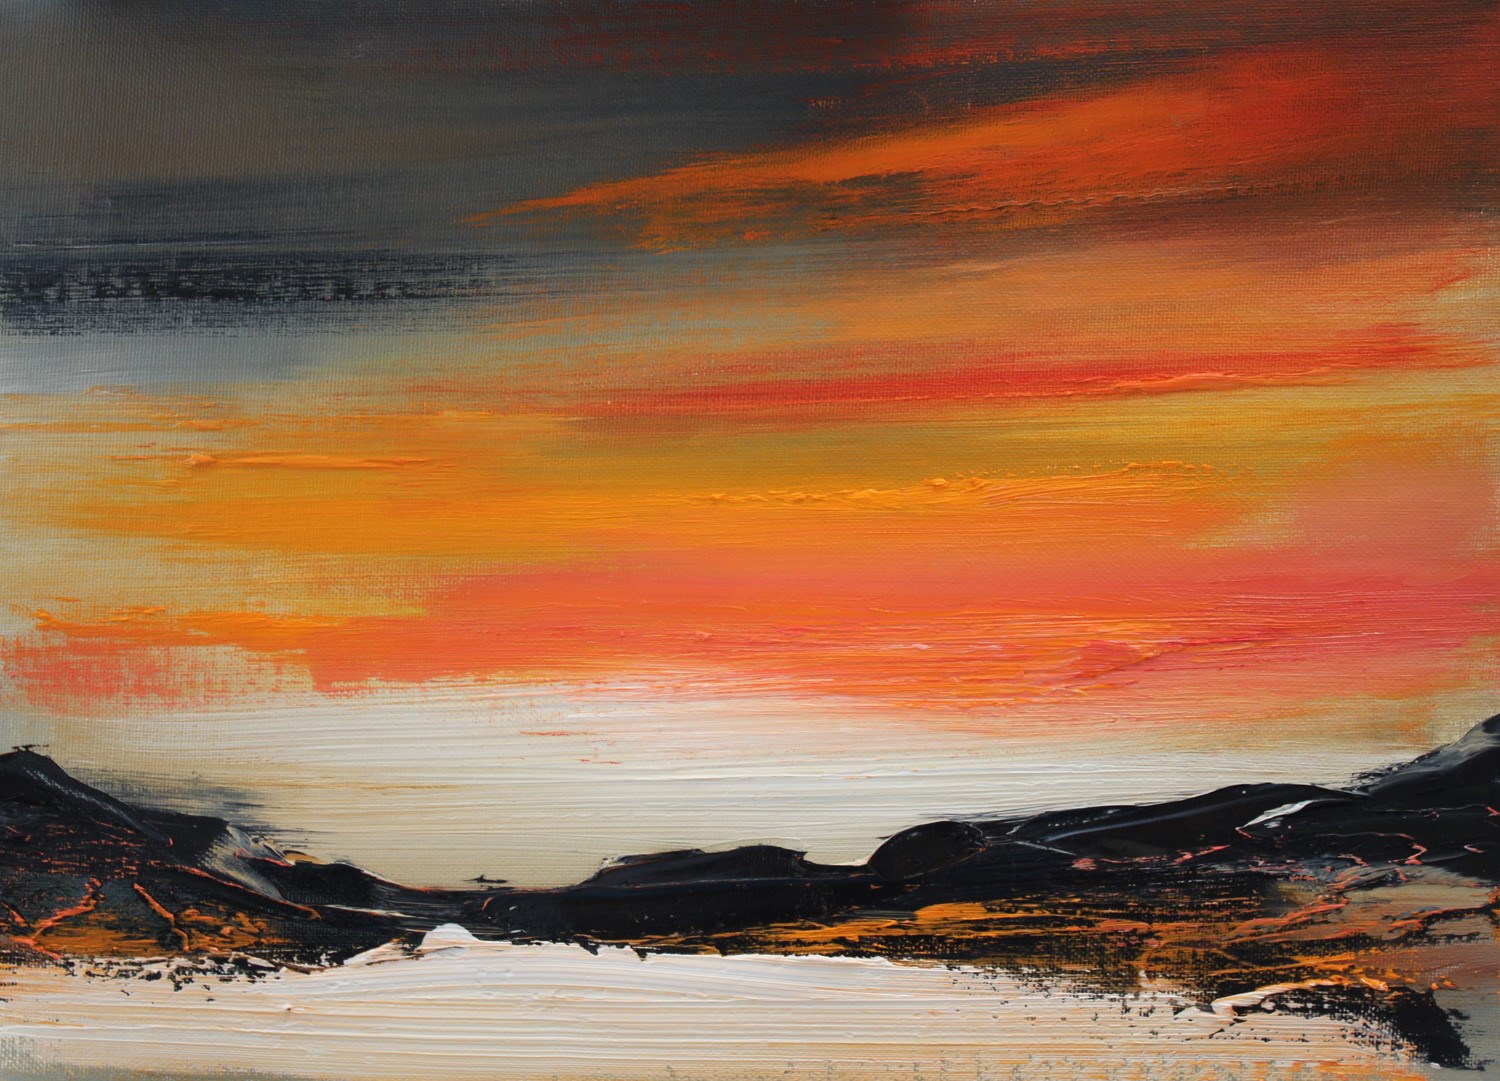 'Illuminated by the Sunset' by artist Rosanne Barr